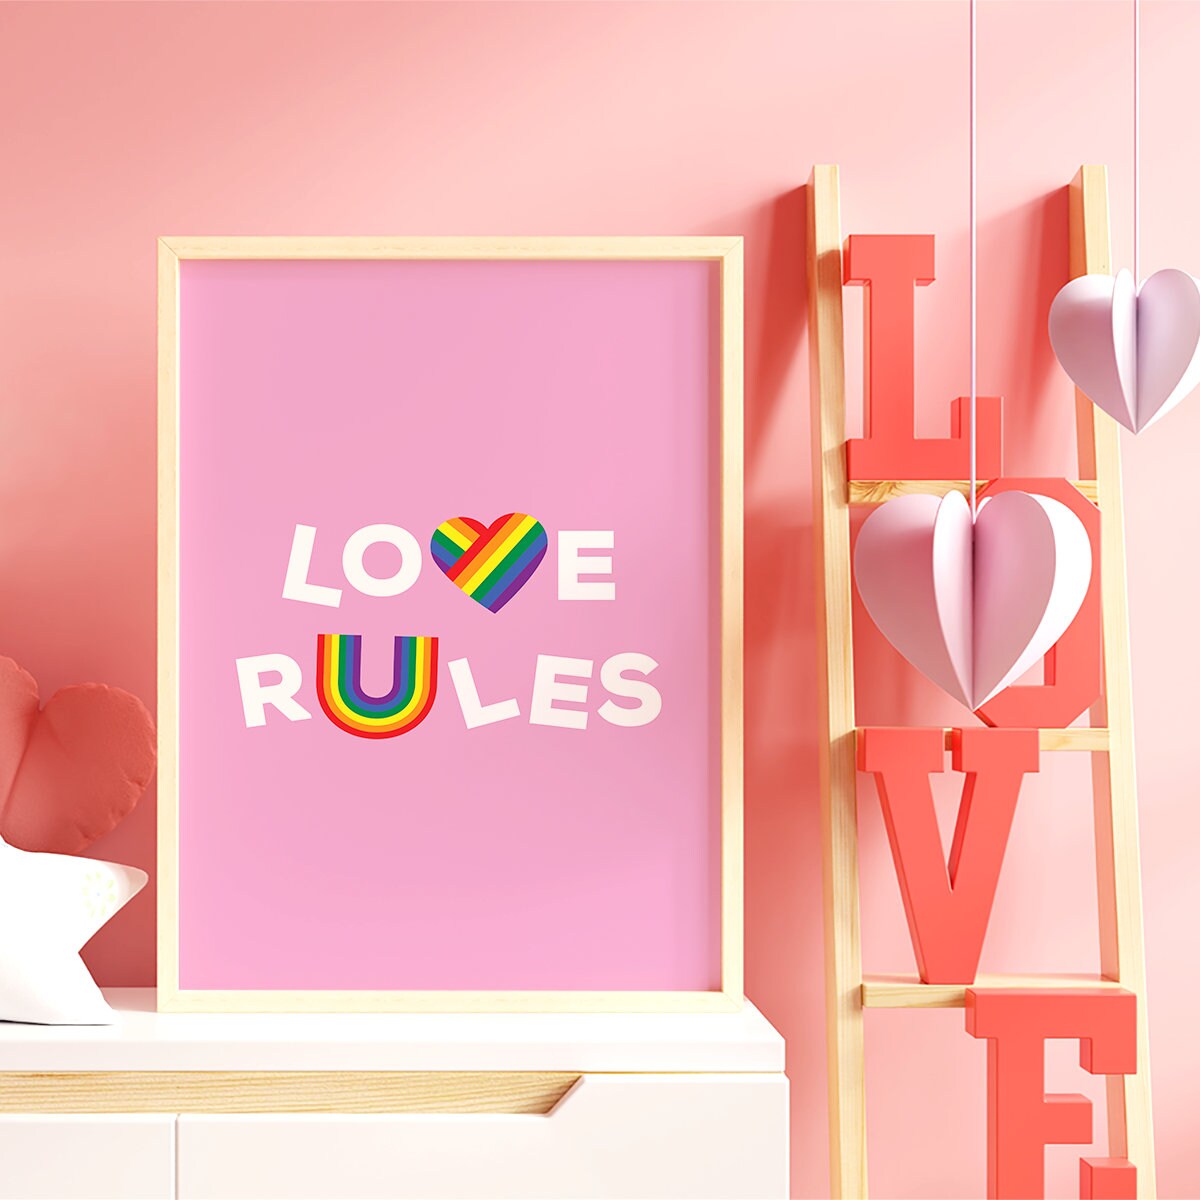 Discover LGBT Love Rules, Inclusion Poster, Pride Art Print